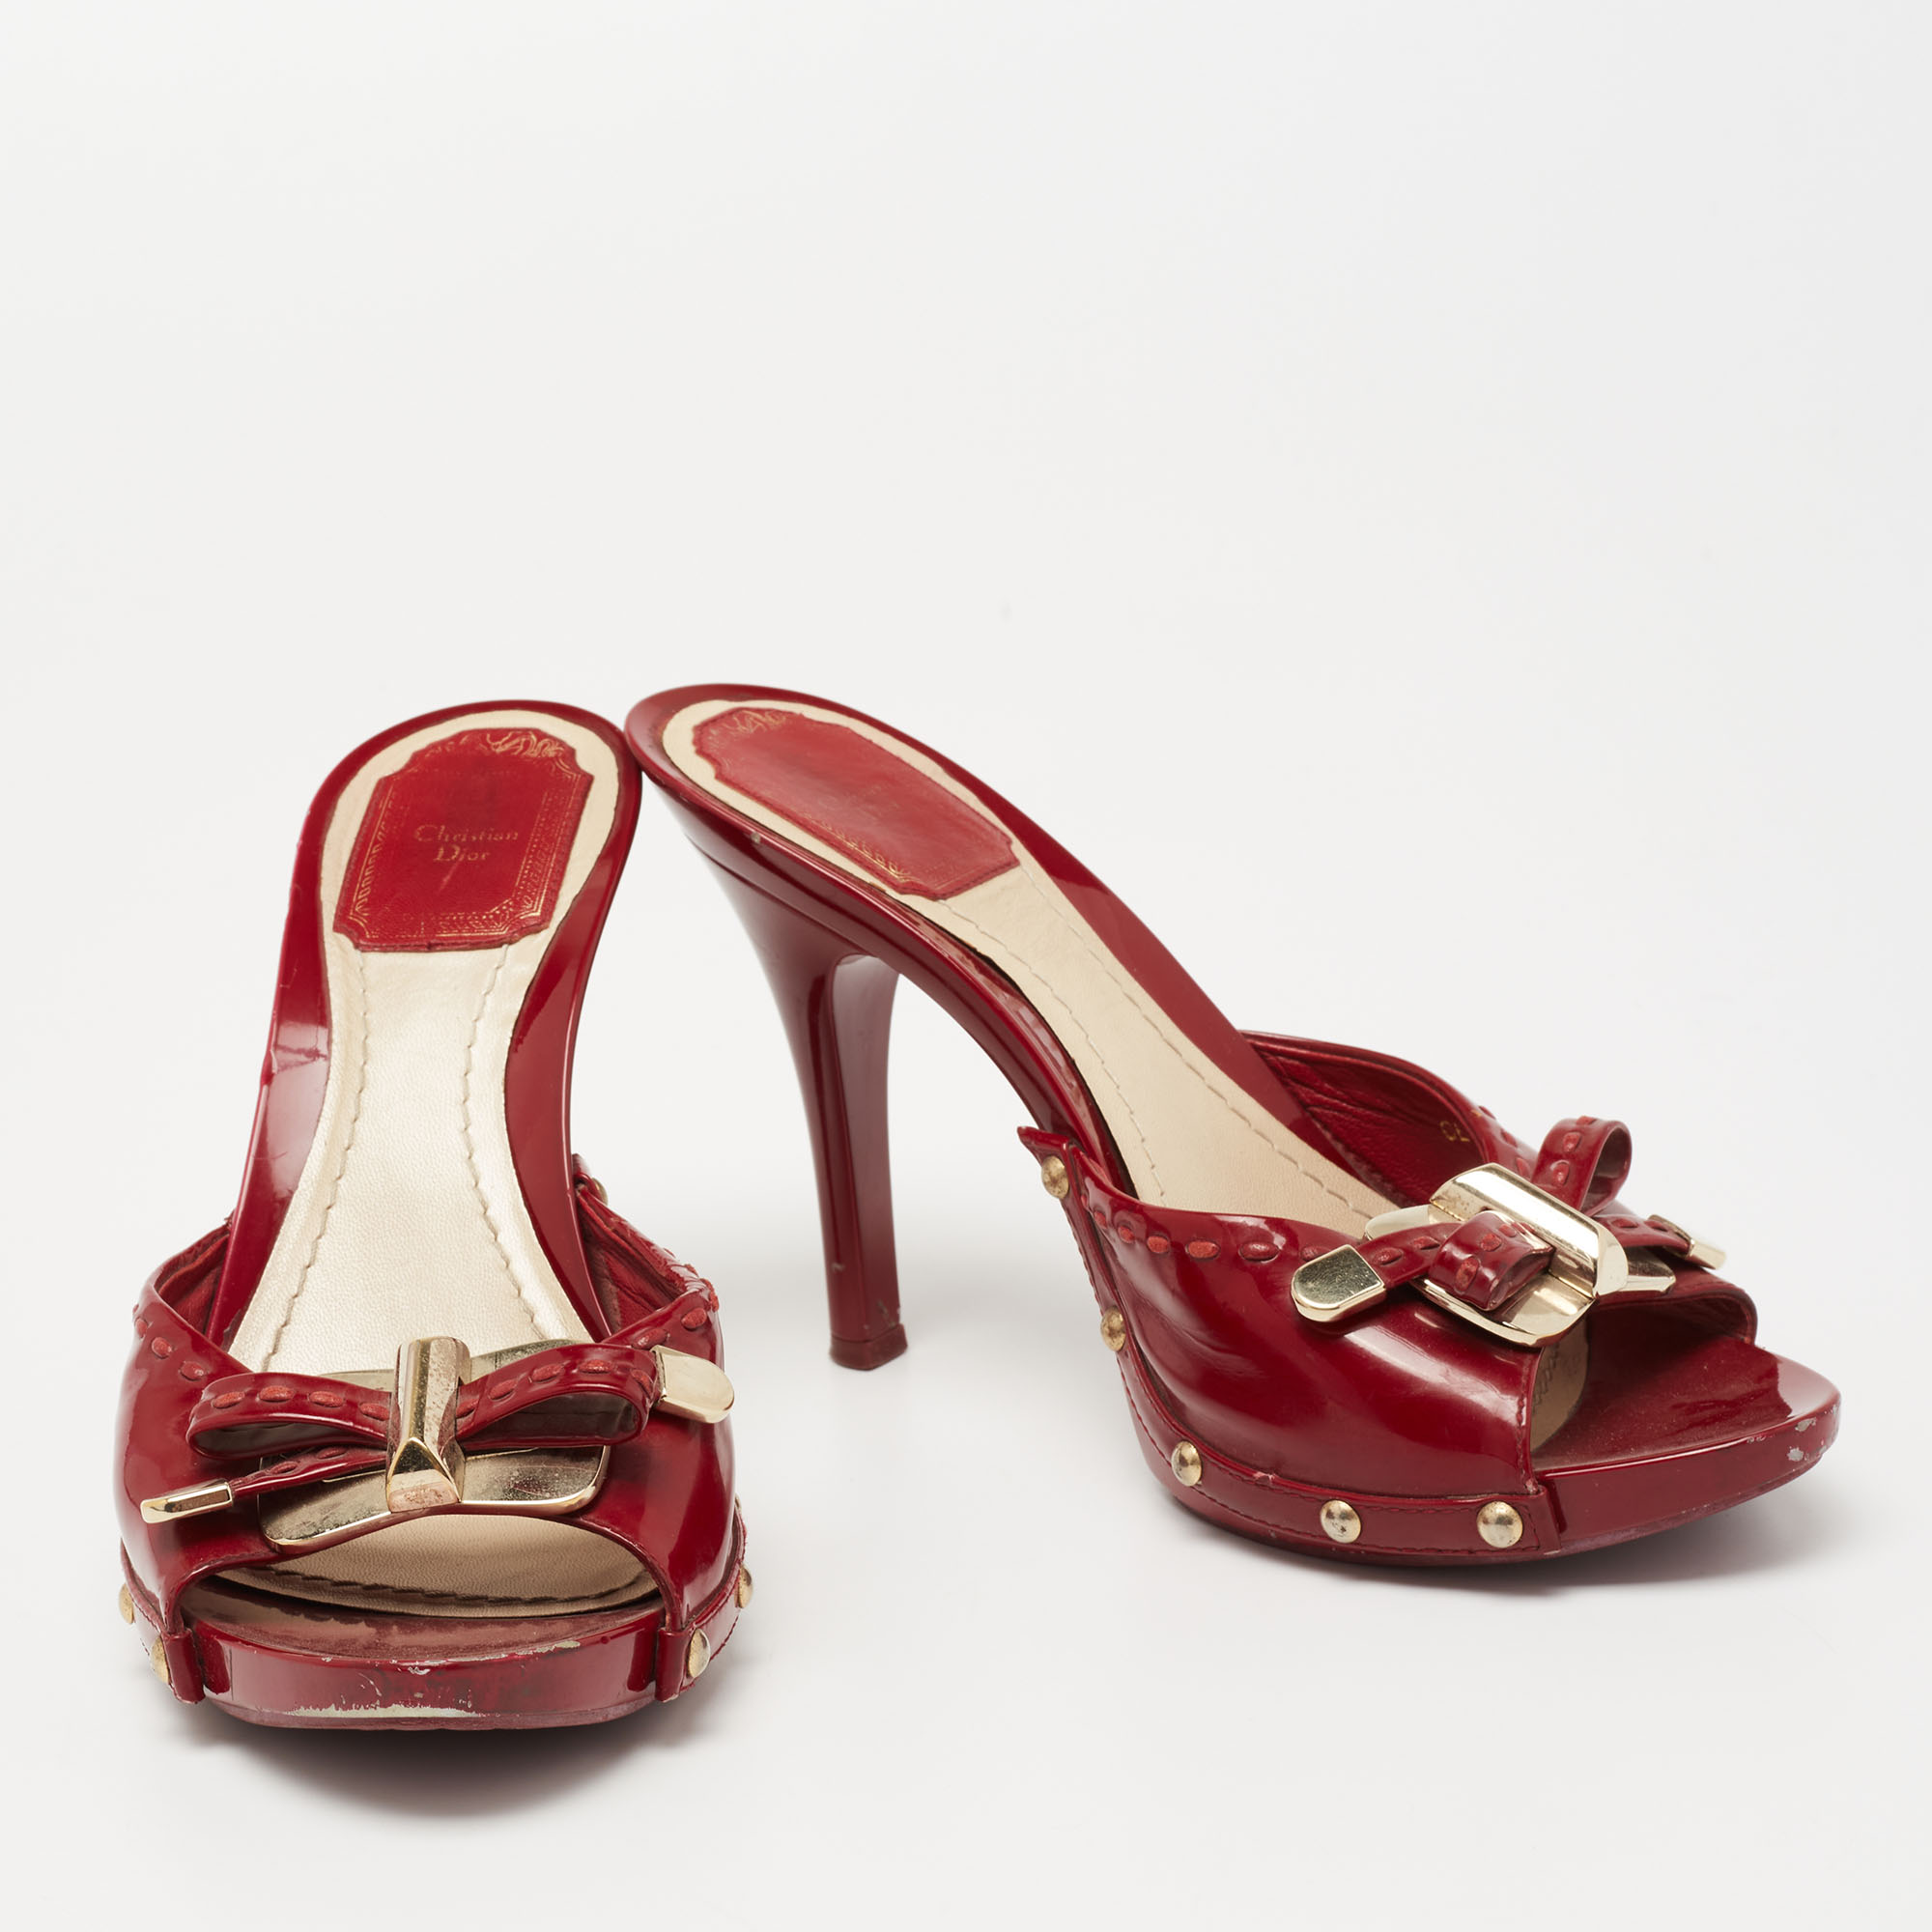 Dior Dark Red Patent Leather Bow Detail Slide Sandals Size 37